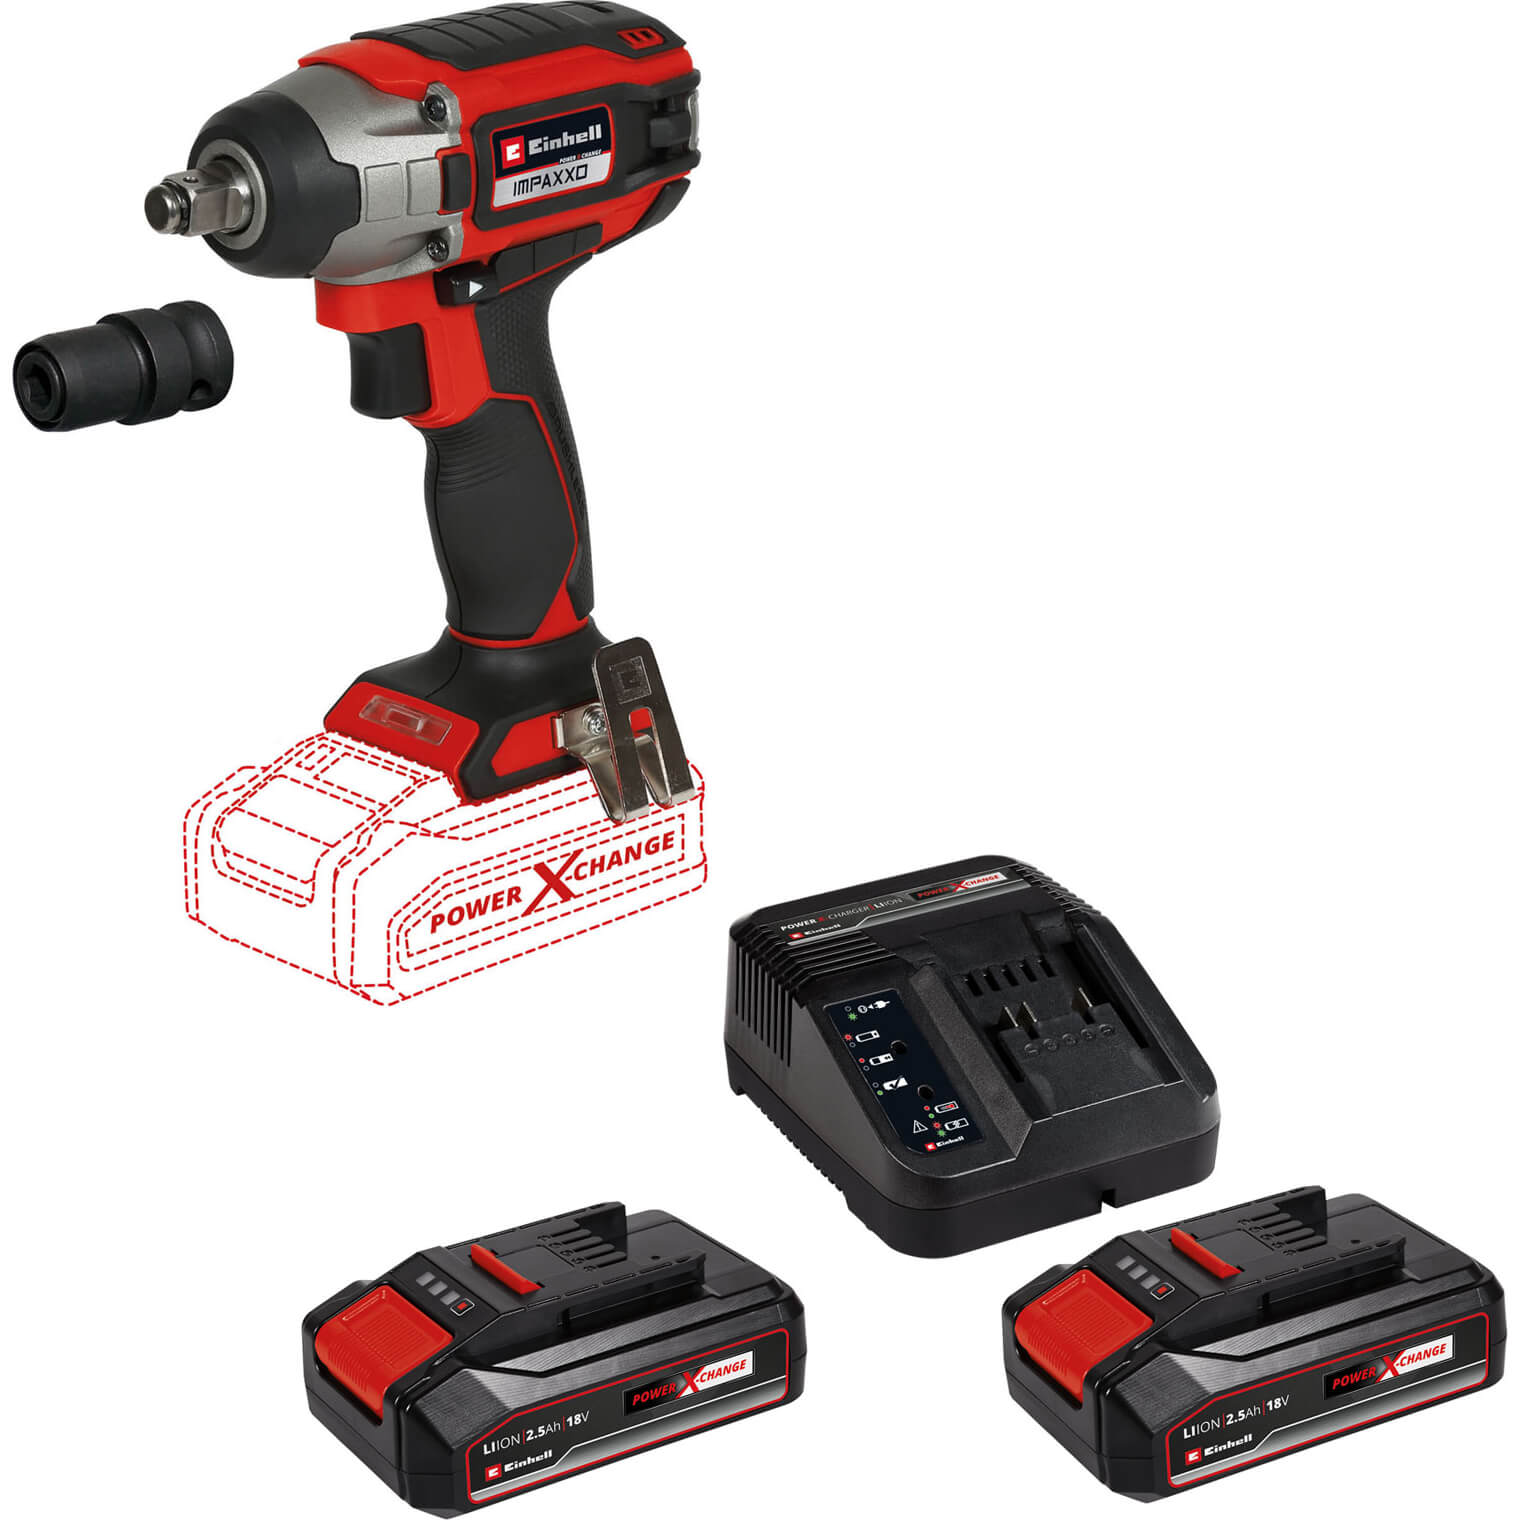 Image of Einhell IMPAXXO 18/230 18v Cordless Brushless 1/2" Impact Wrench 2 x 2.5ah Li-ion Charger No Case